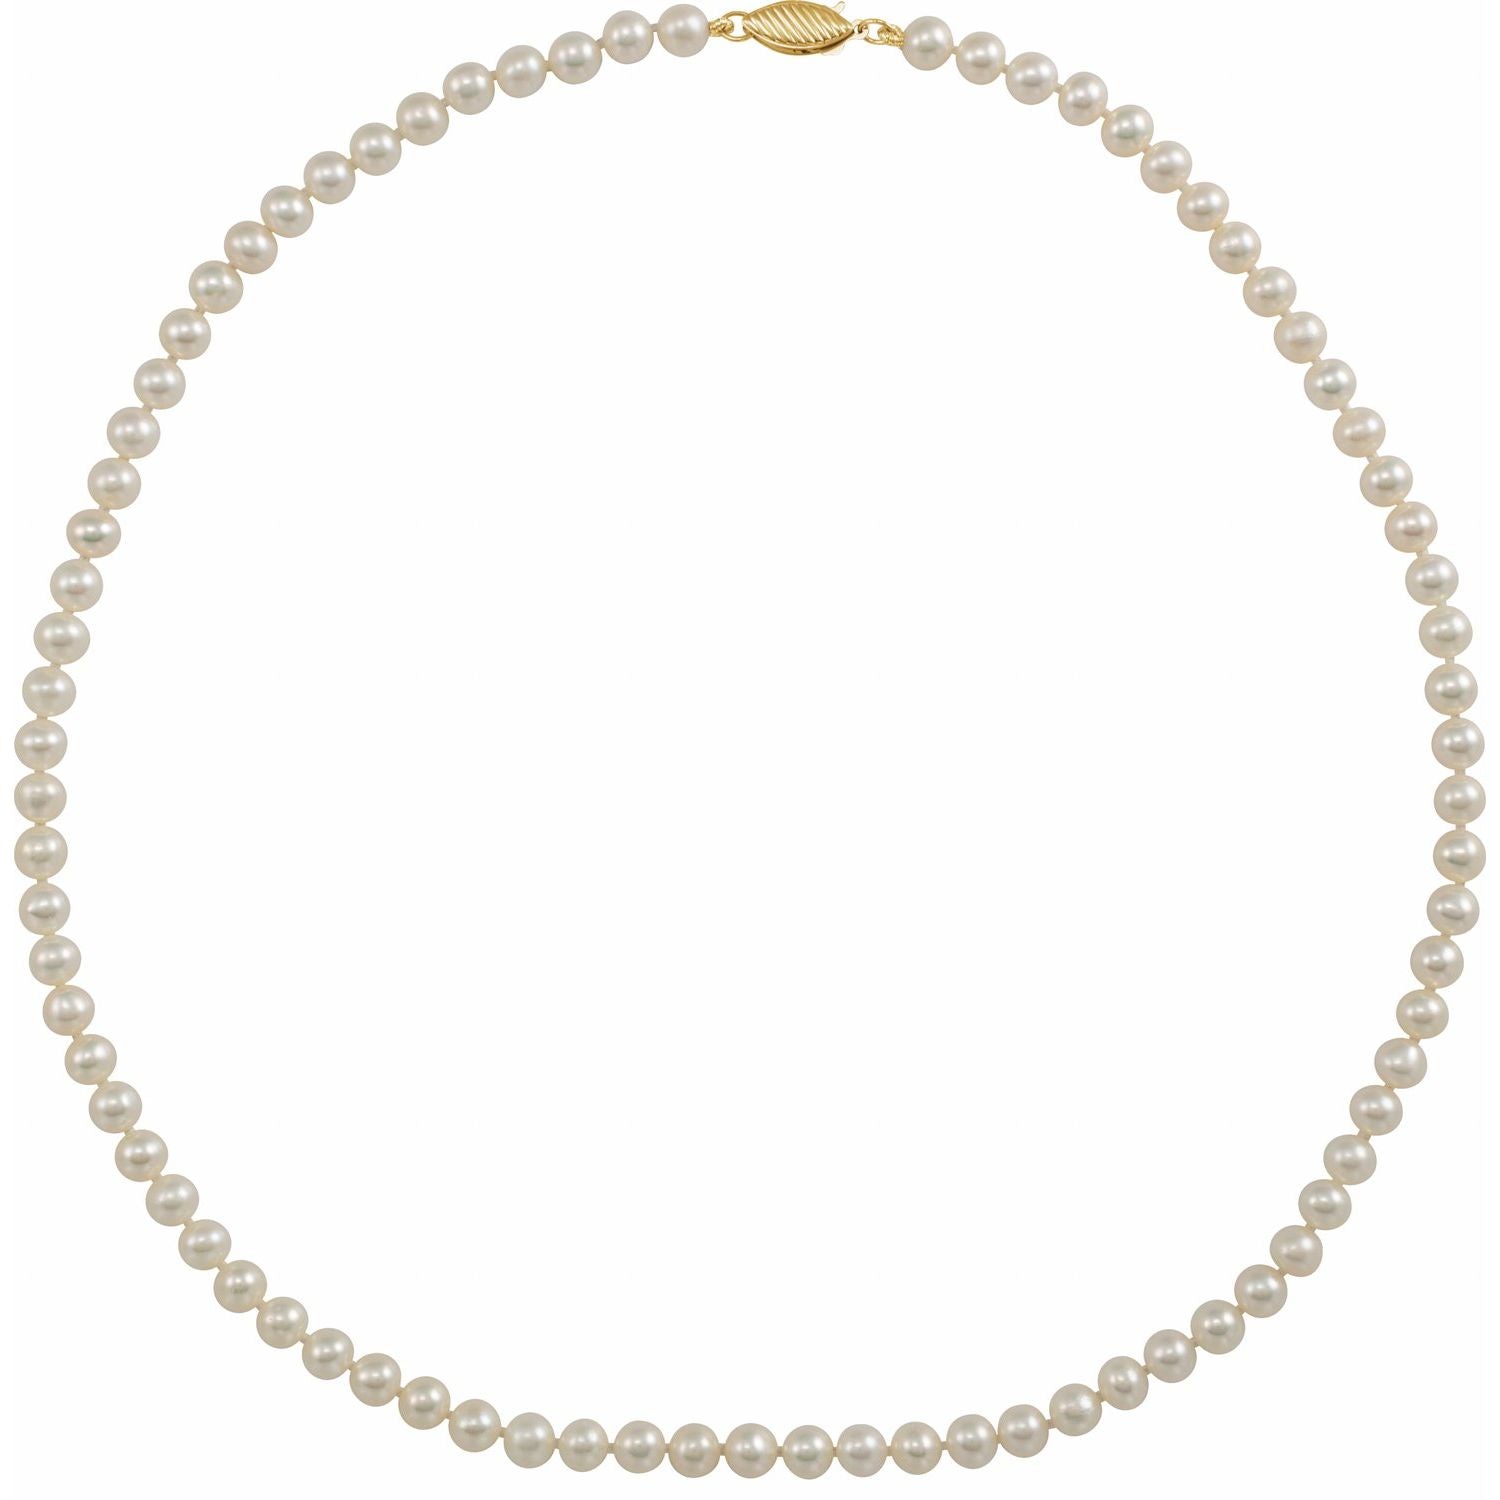 Necklace - White Cultured Freshwater Pearl with 14K Yellow Gold Clasp (16" or 18")